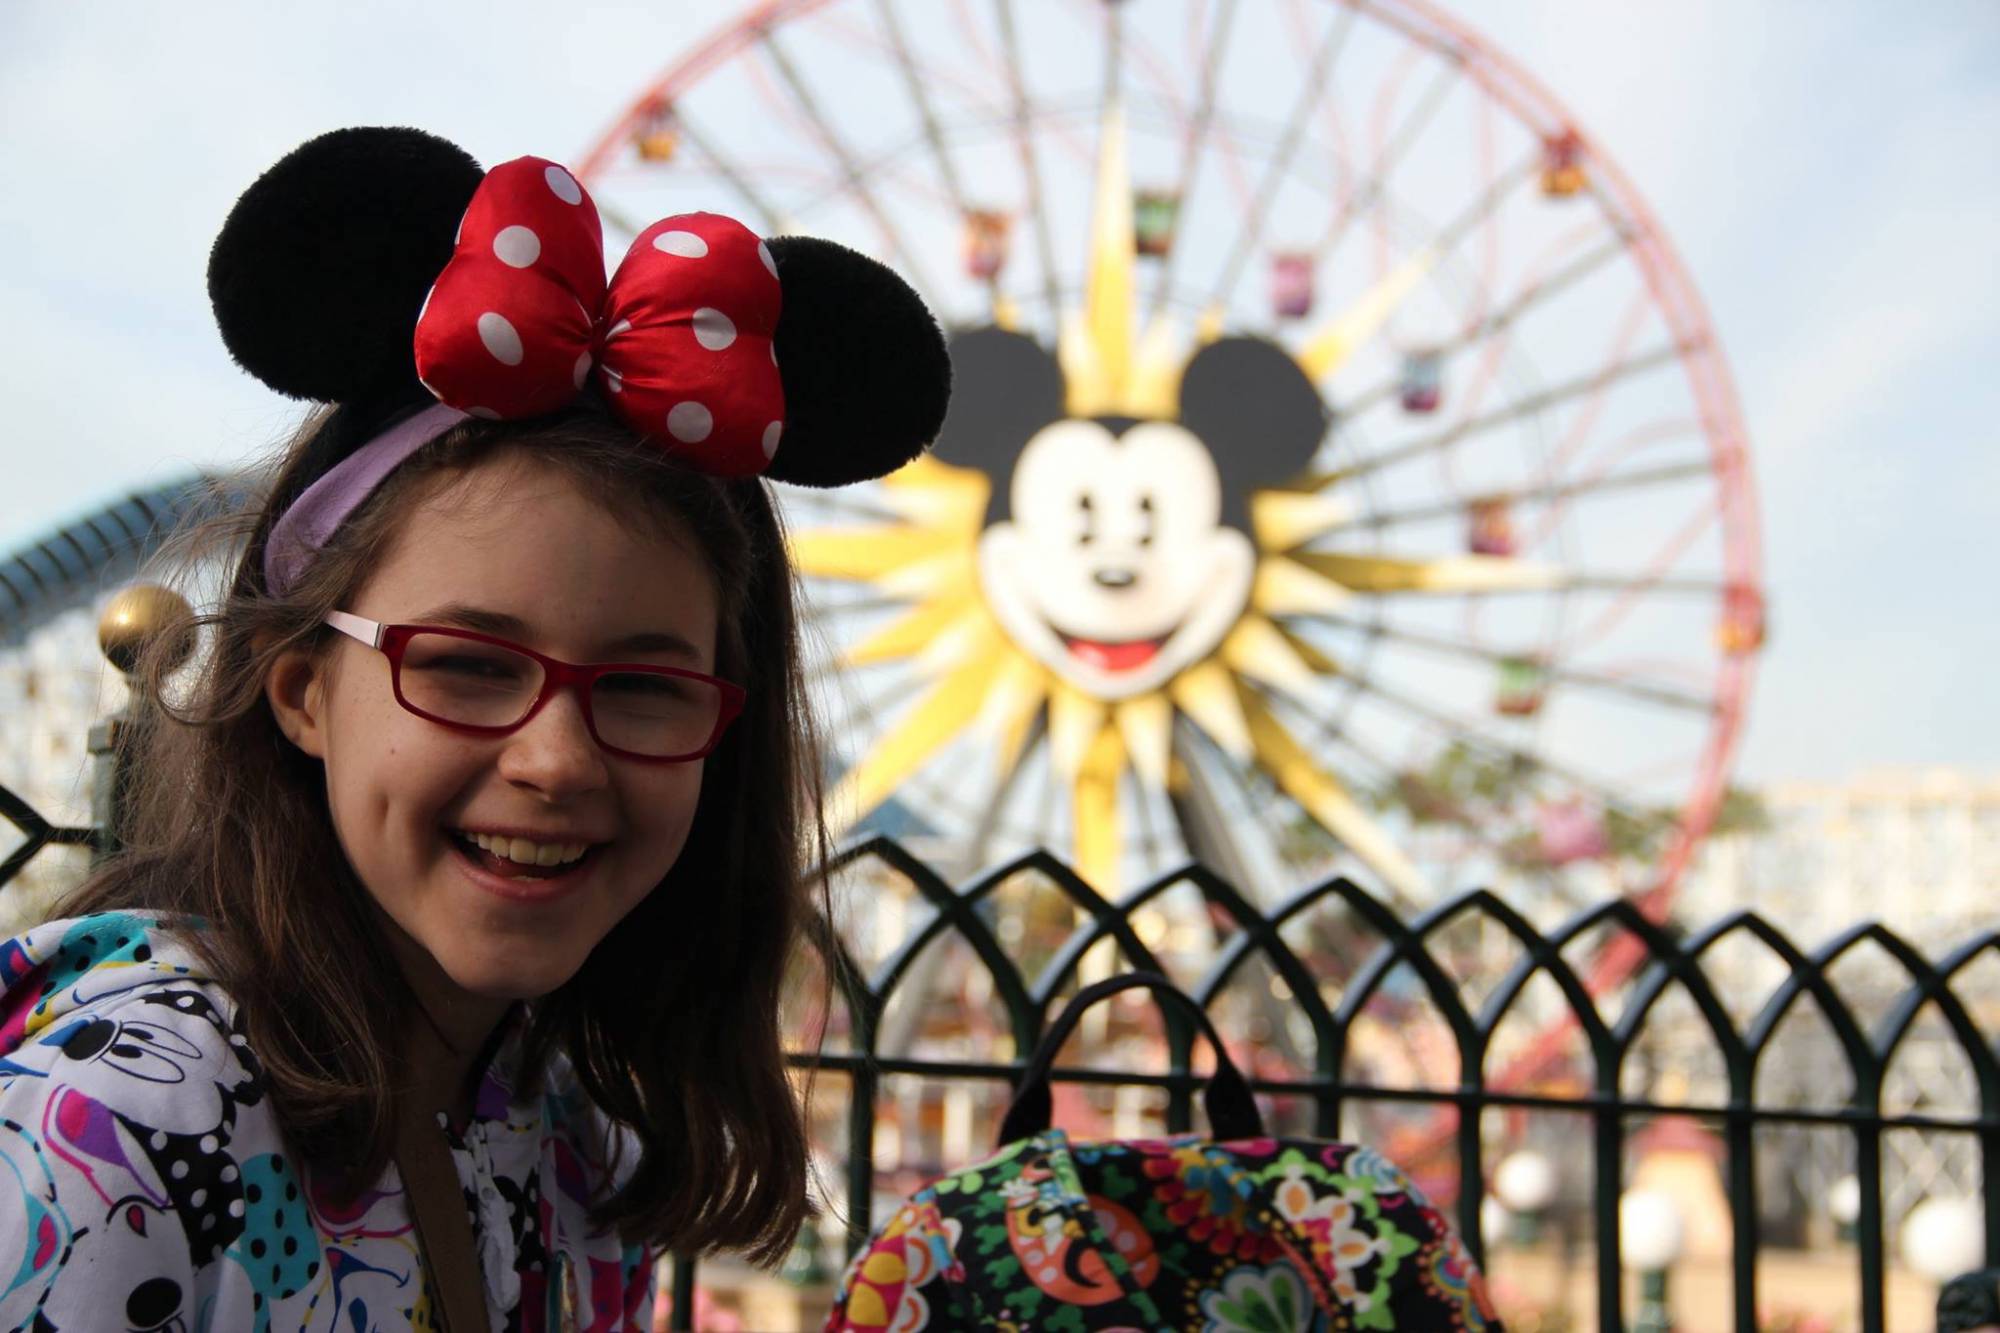 Eight things kids will like about Disneyland, by 10-year-old Abby Wear |PassPorter.com